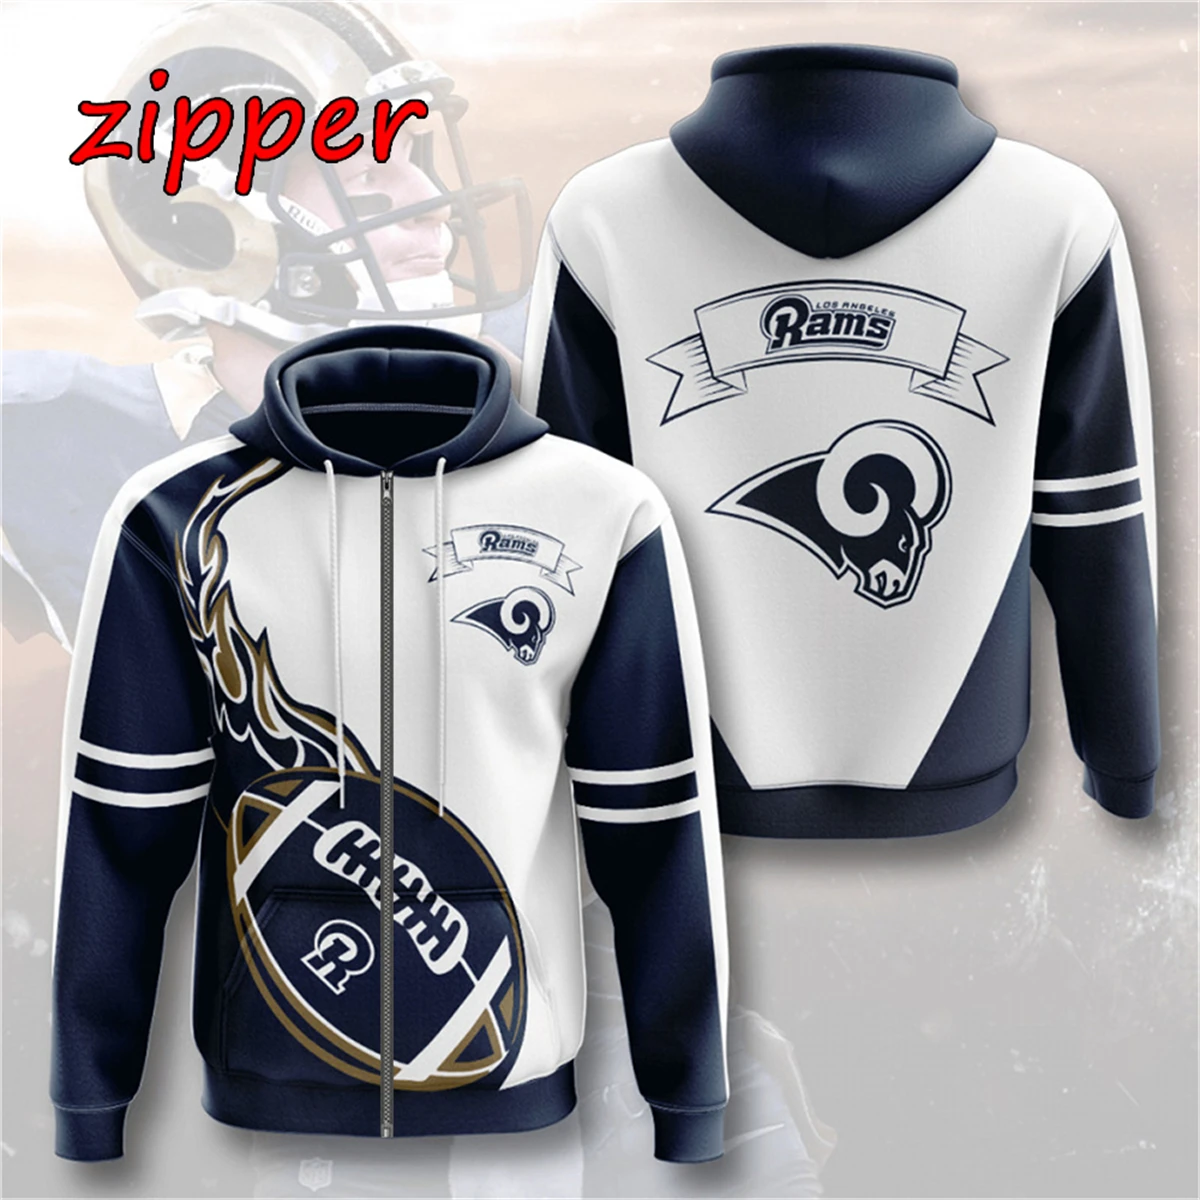 

2023 handsome football uniform jacket 3D digital print men's and women's zip hoodie spring and autumn sports casual fashion brea